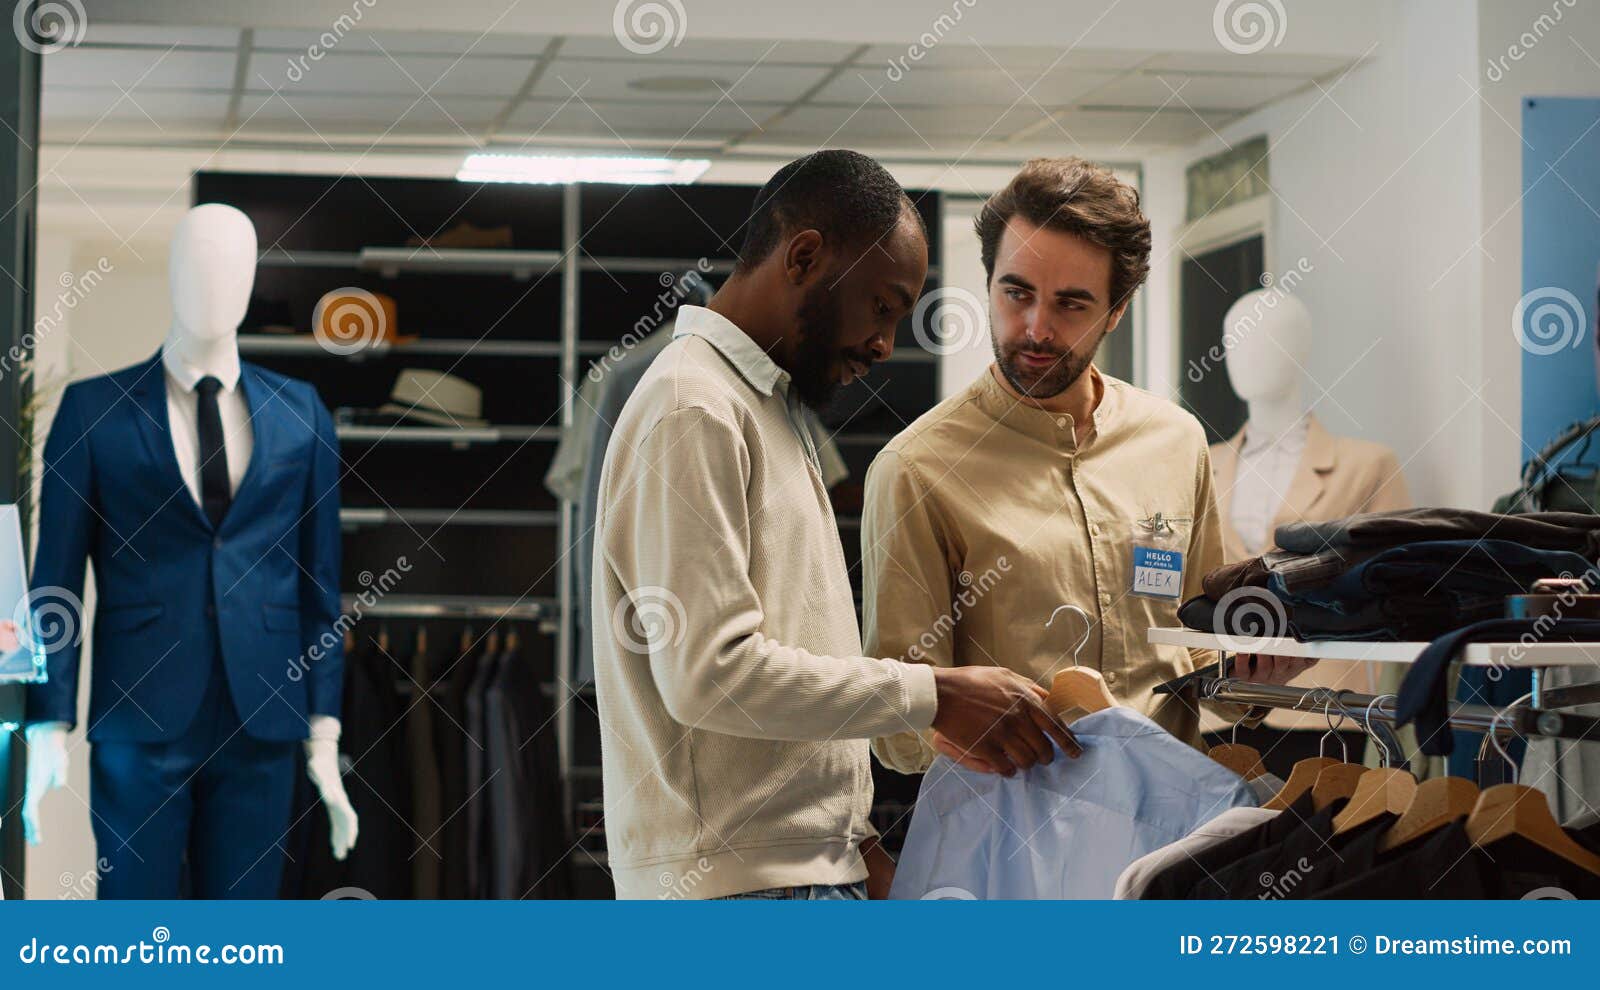 Young Shopper Asking Shop Worker for Help with Clothes Stock Image ...